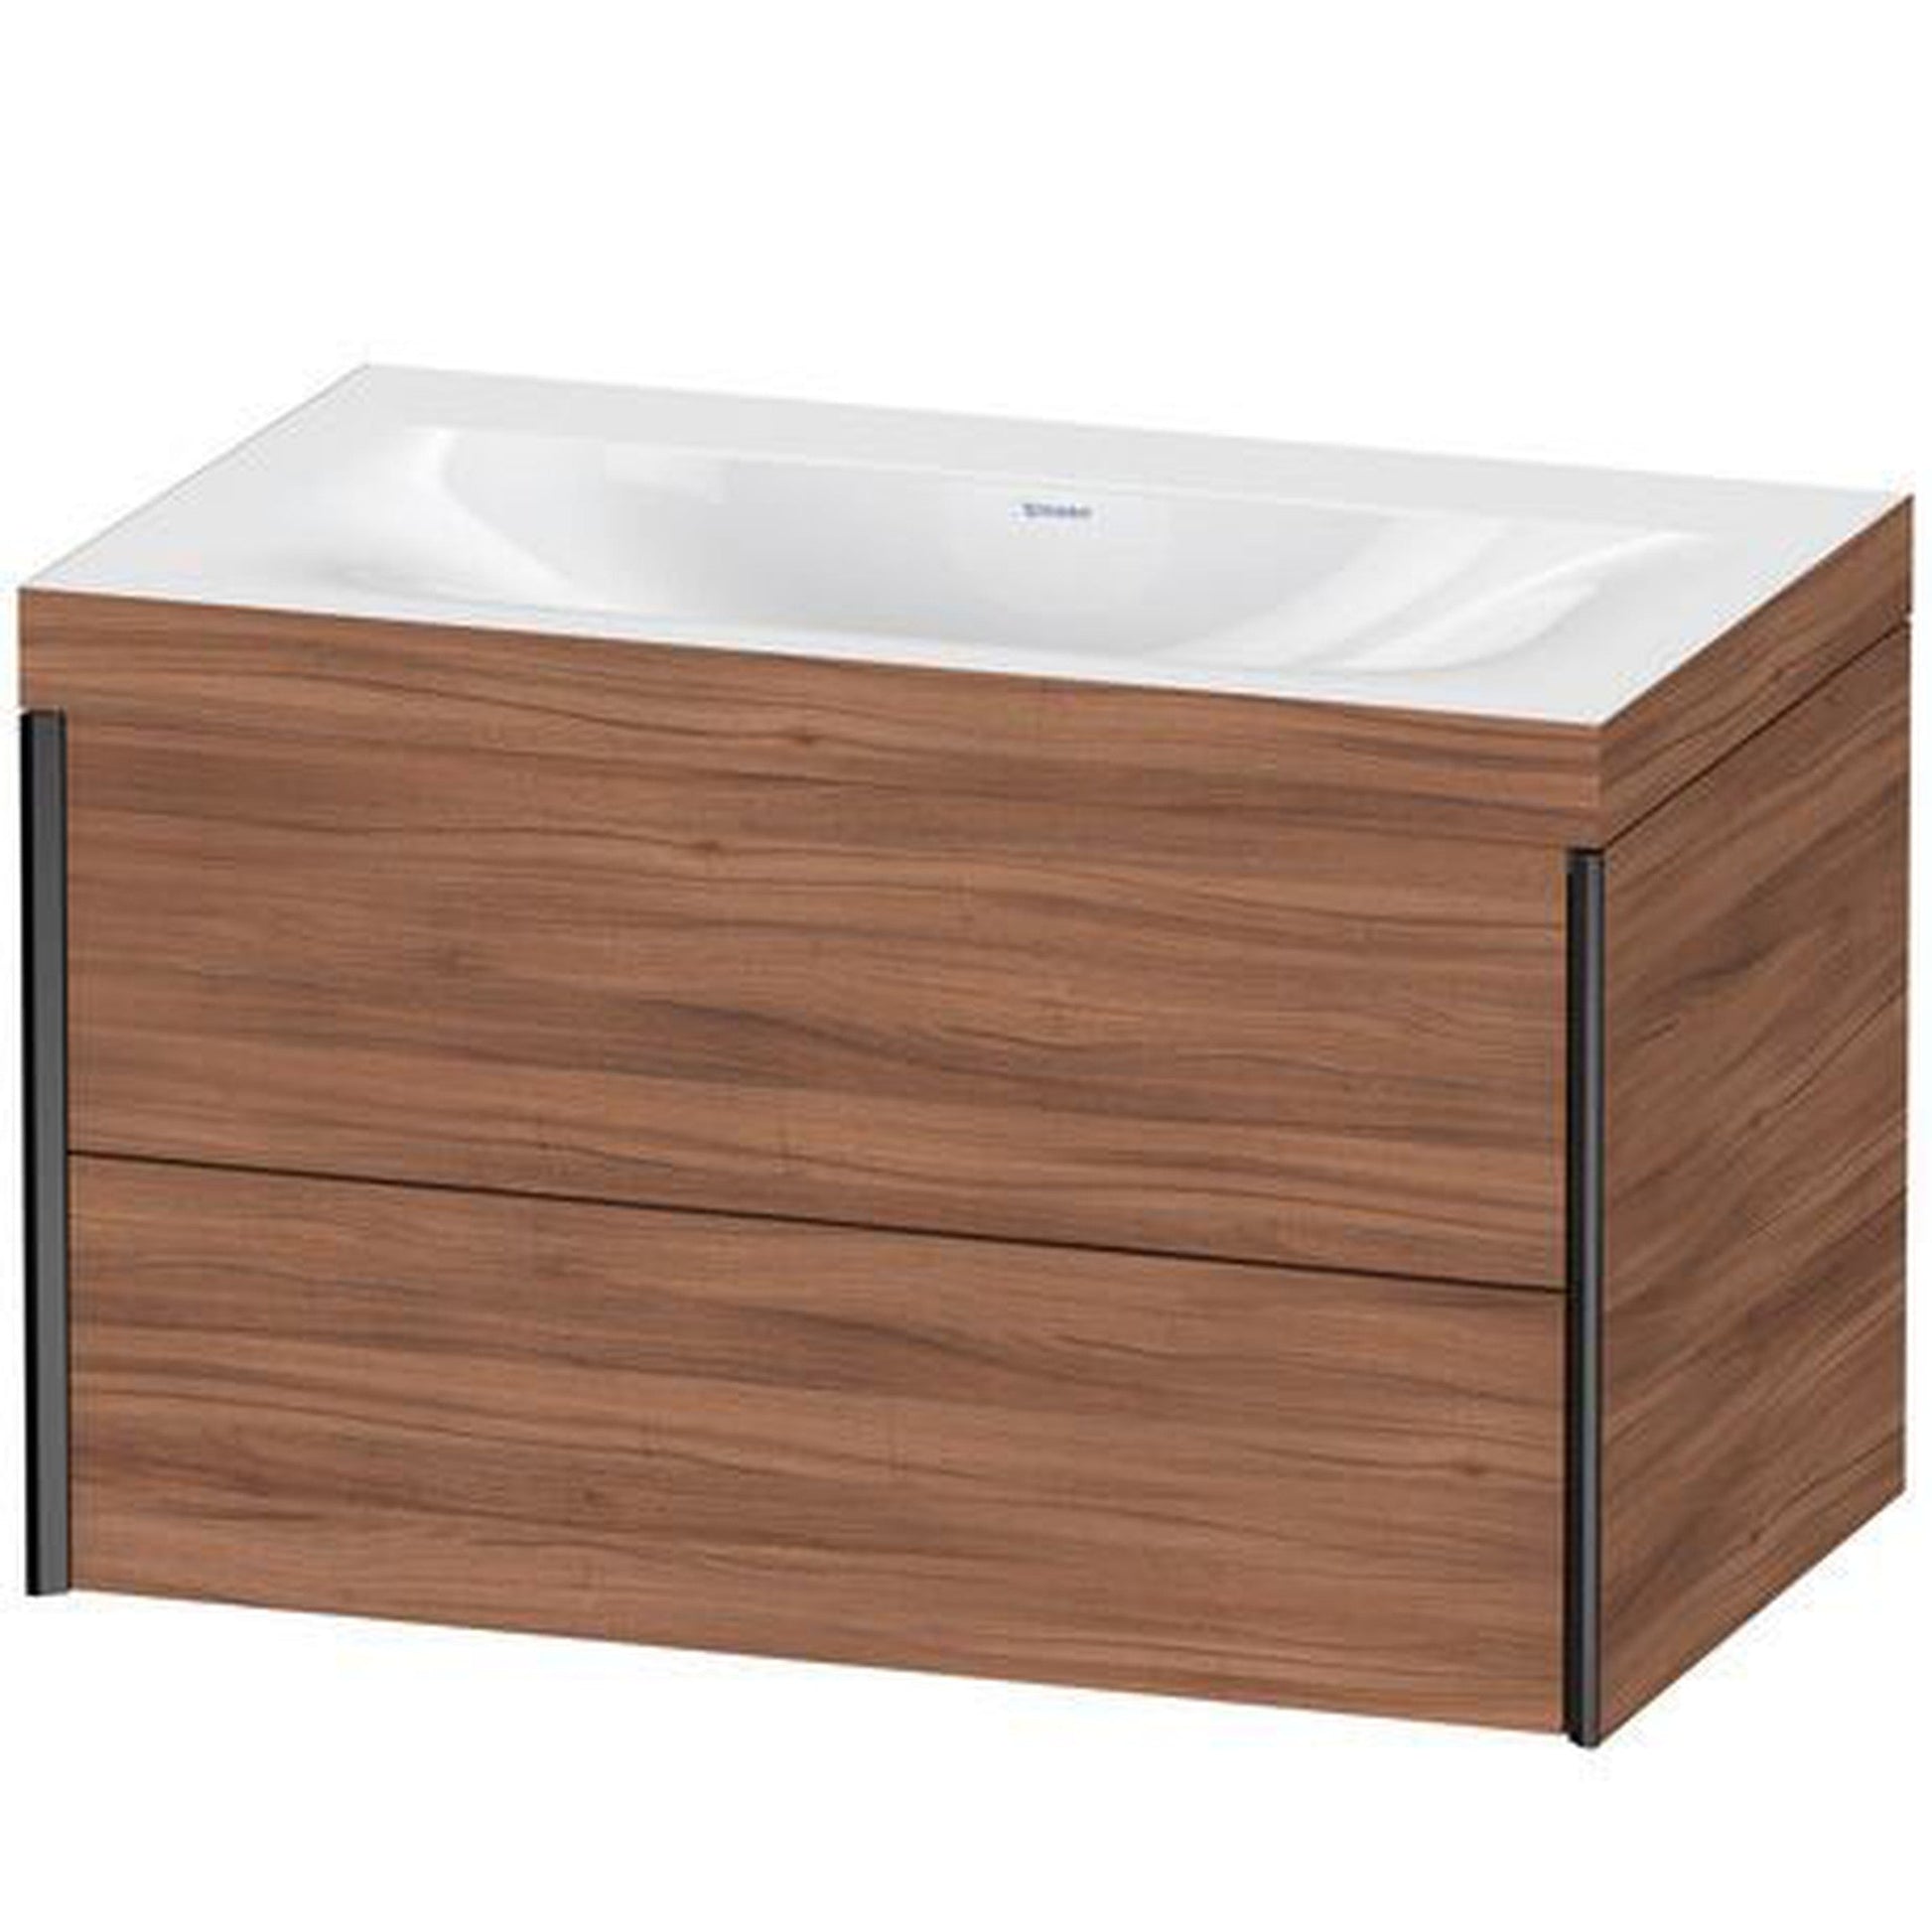 Duravit Xviu 31" x 20" x 19" Two Drawer C-Bonded Wall-Mount Vanity Kit Without Tap Hole, Walnut (XV4615NB279C)